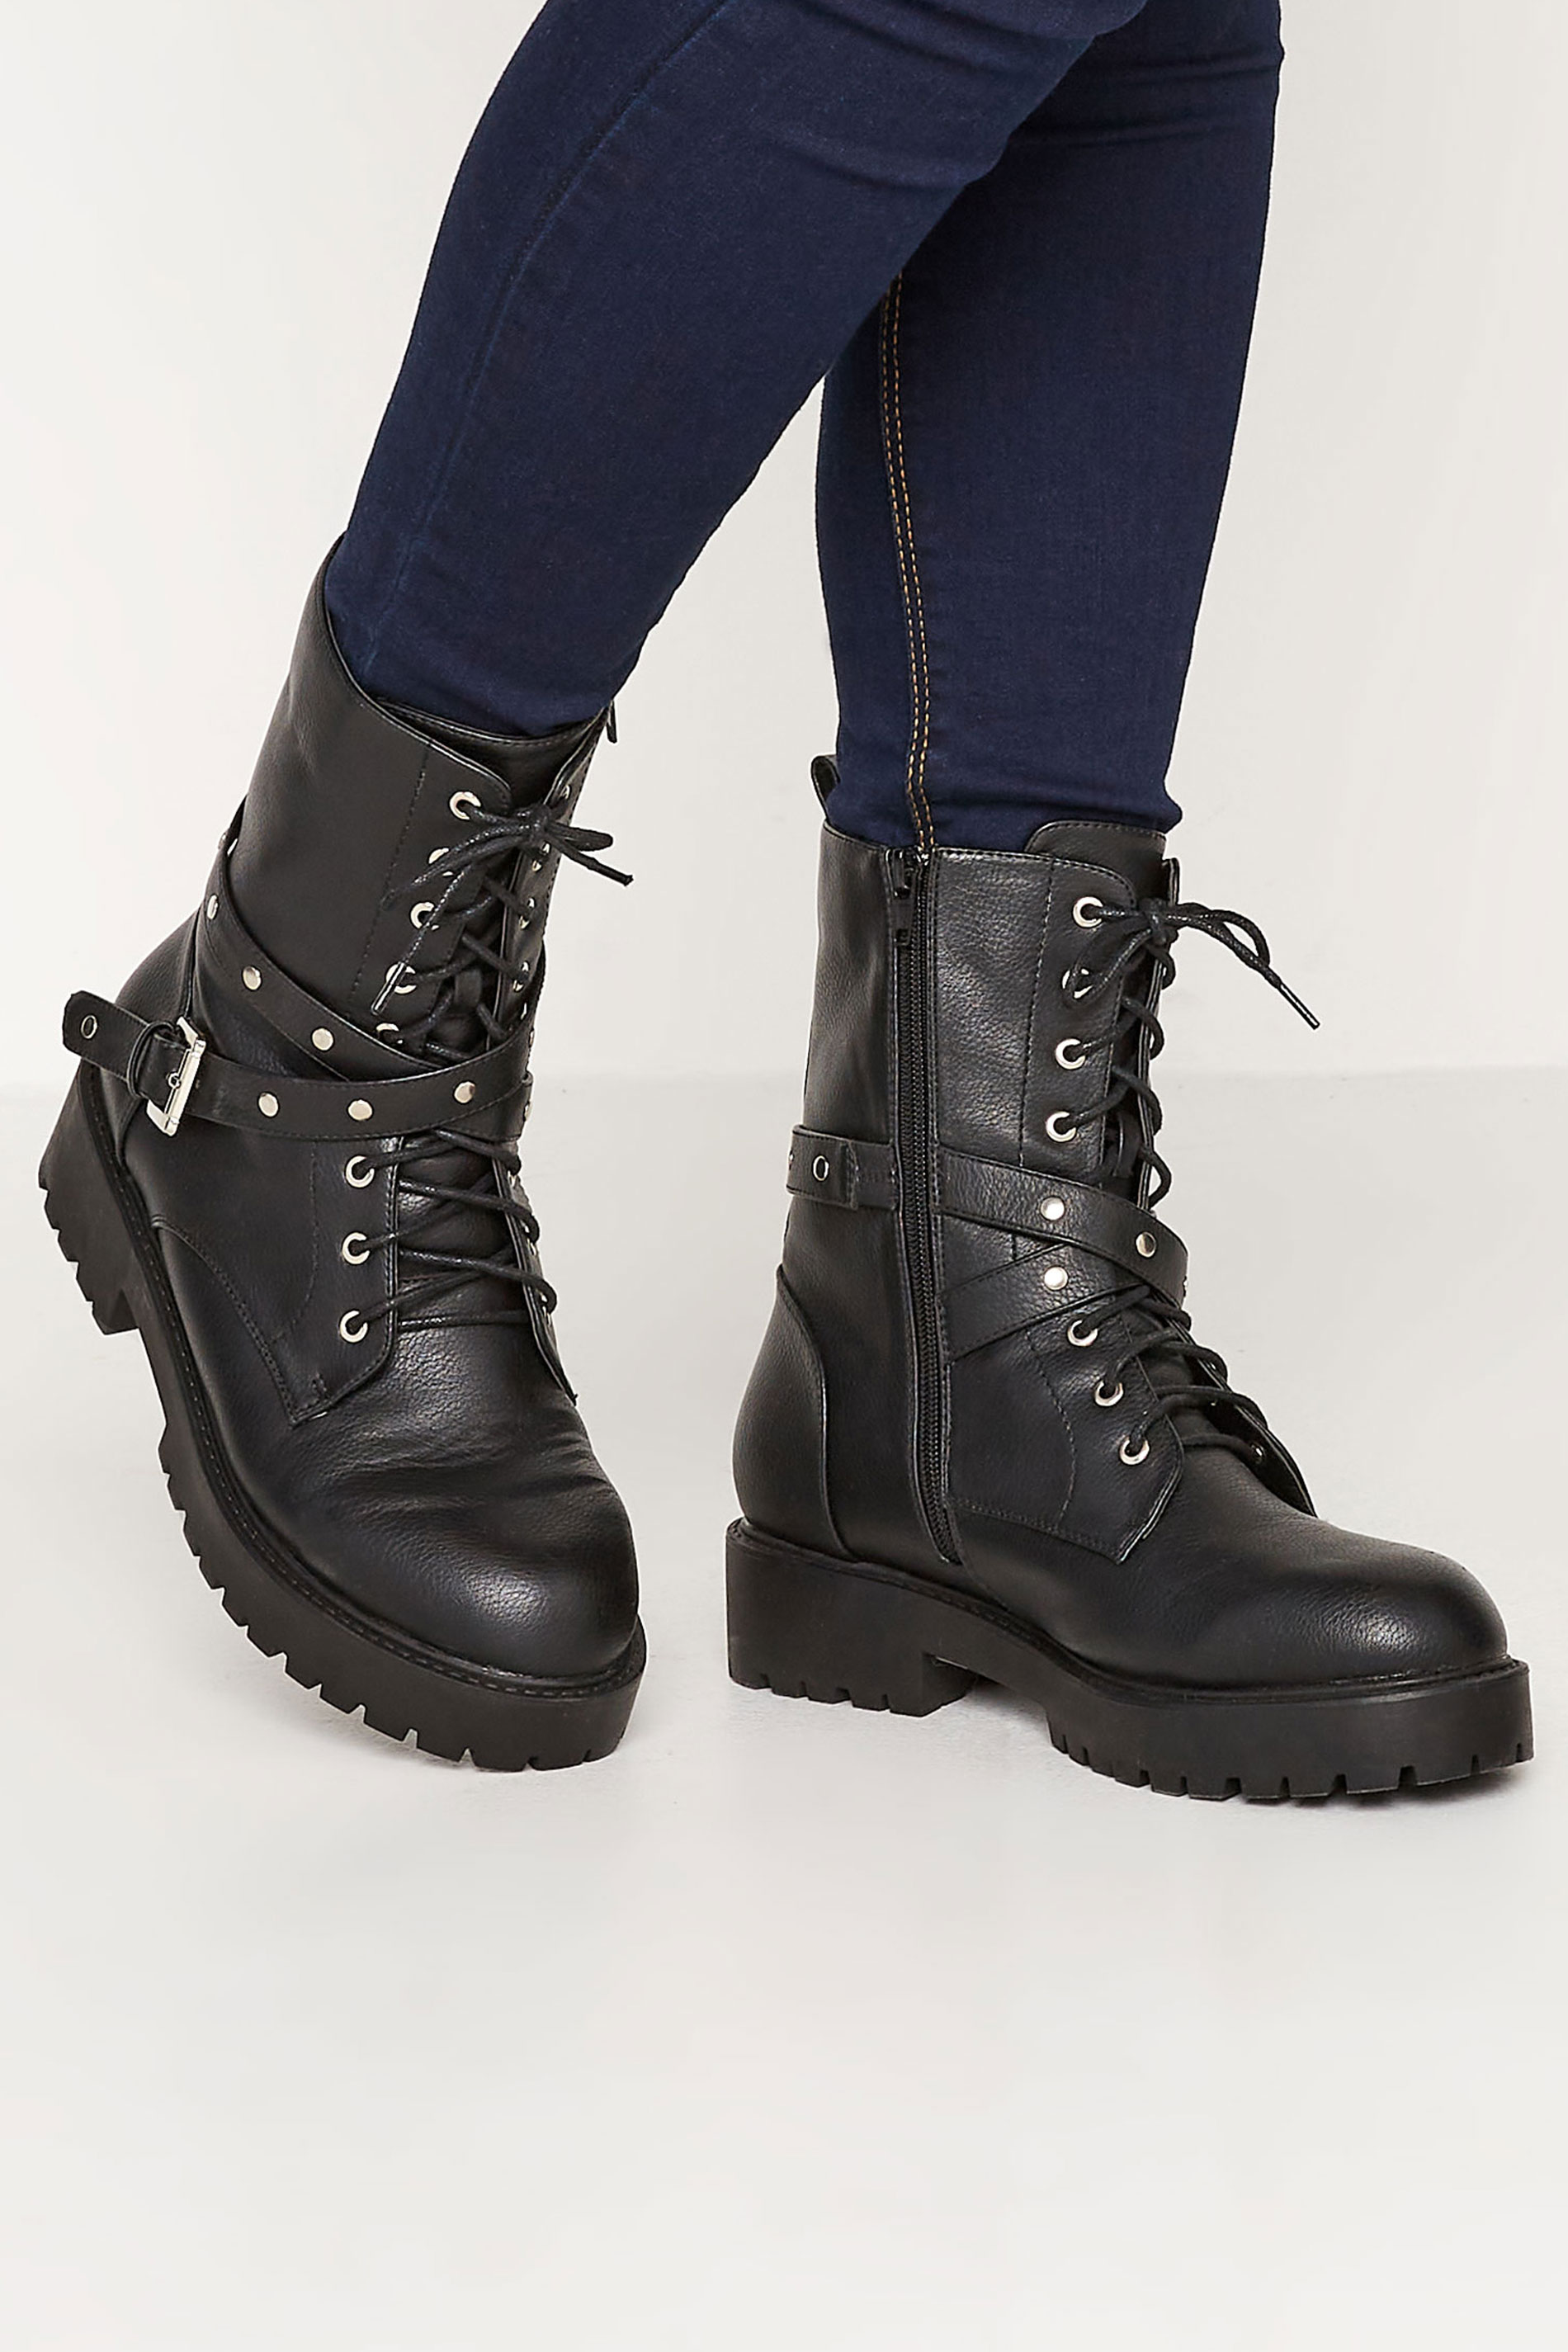 Black Studded Strap Lace Up Chunky Boots In Extra Wide EEE Fit 1